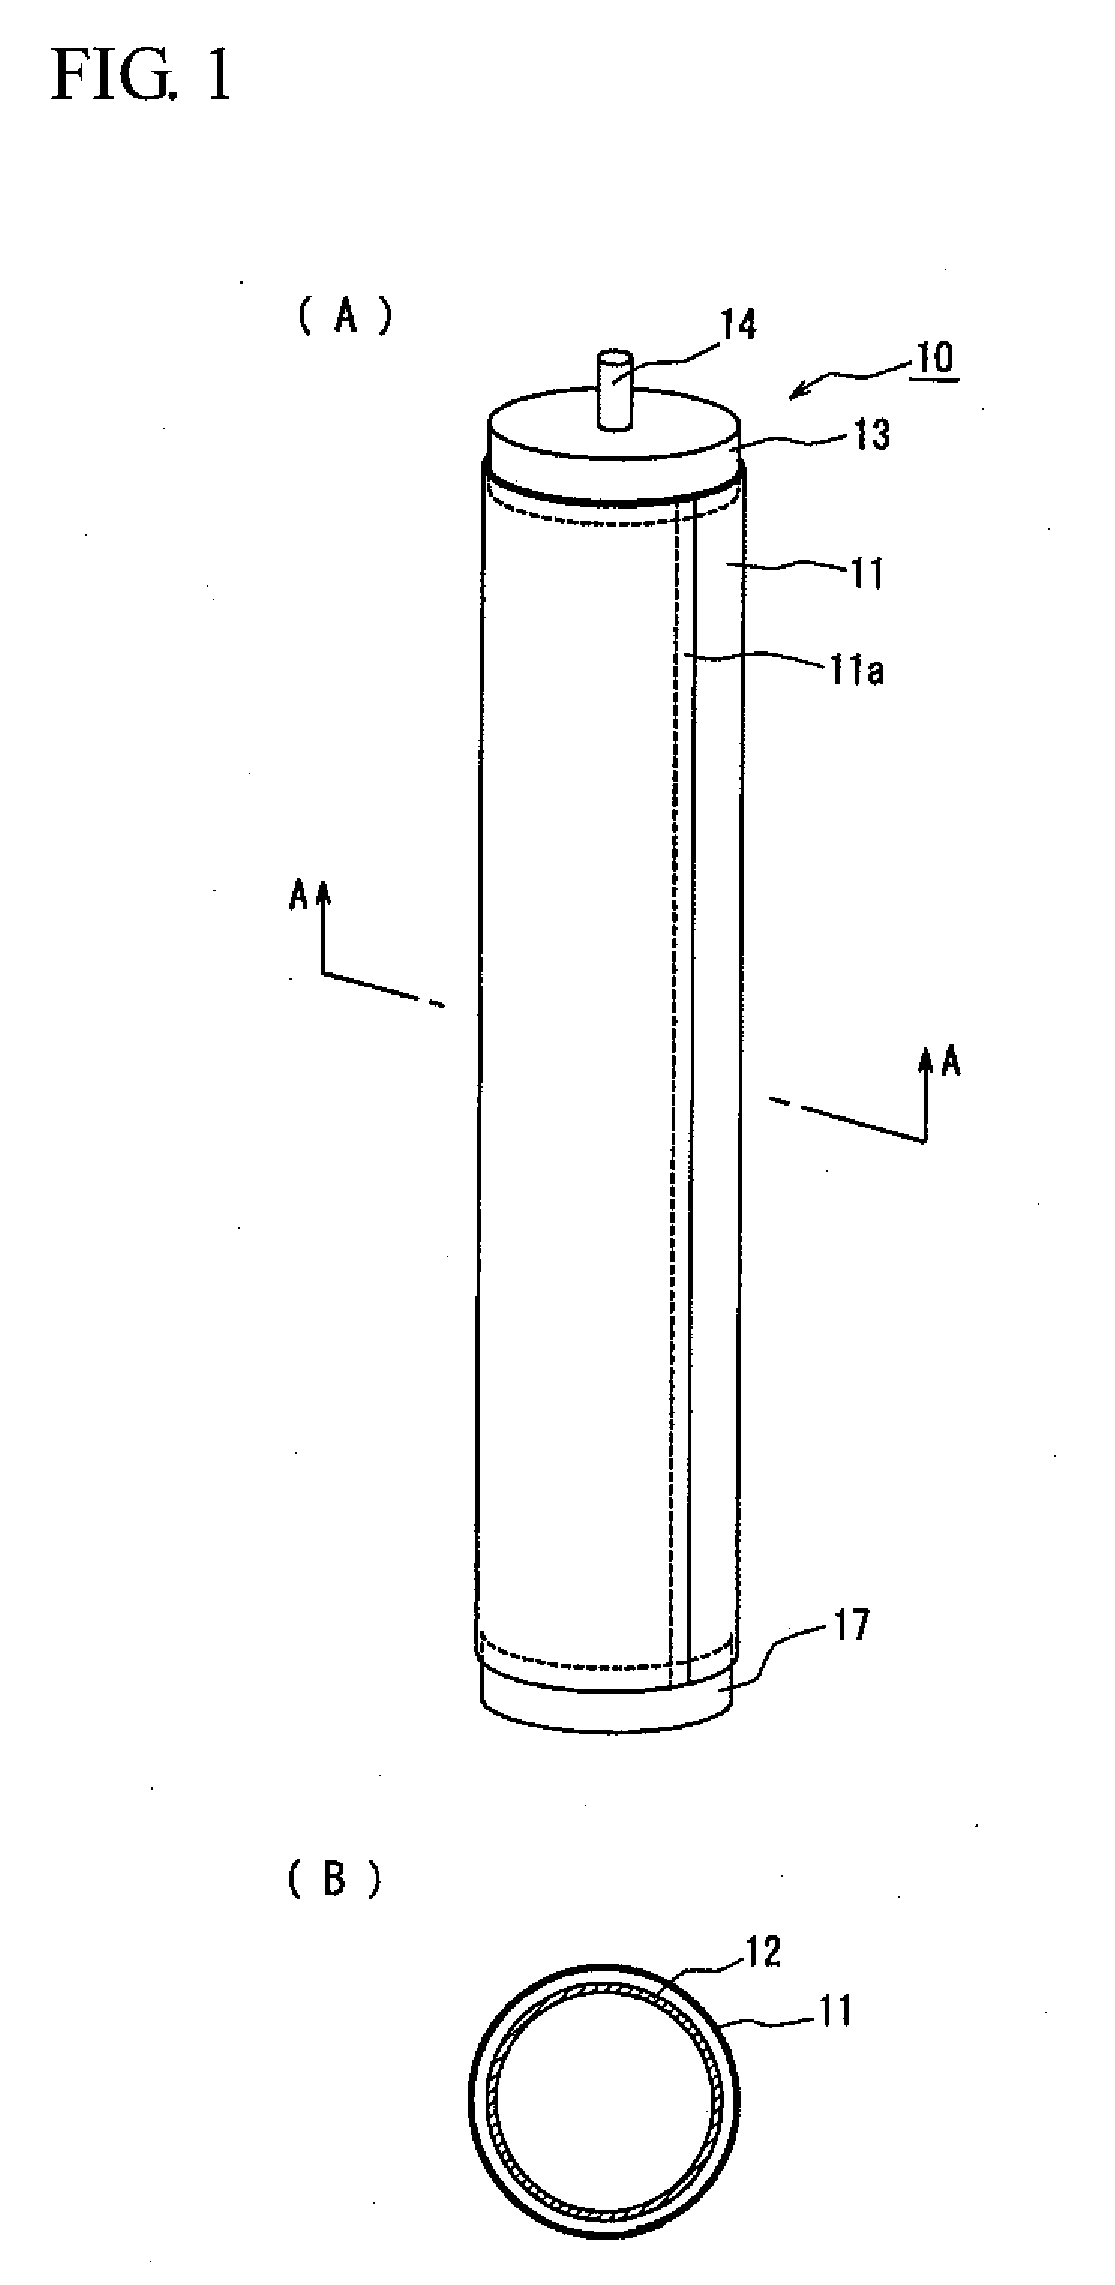 Separation membrane element for filtration and membrane module for filtration